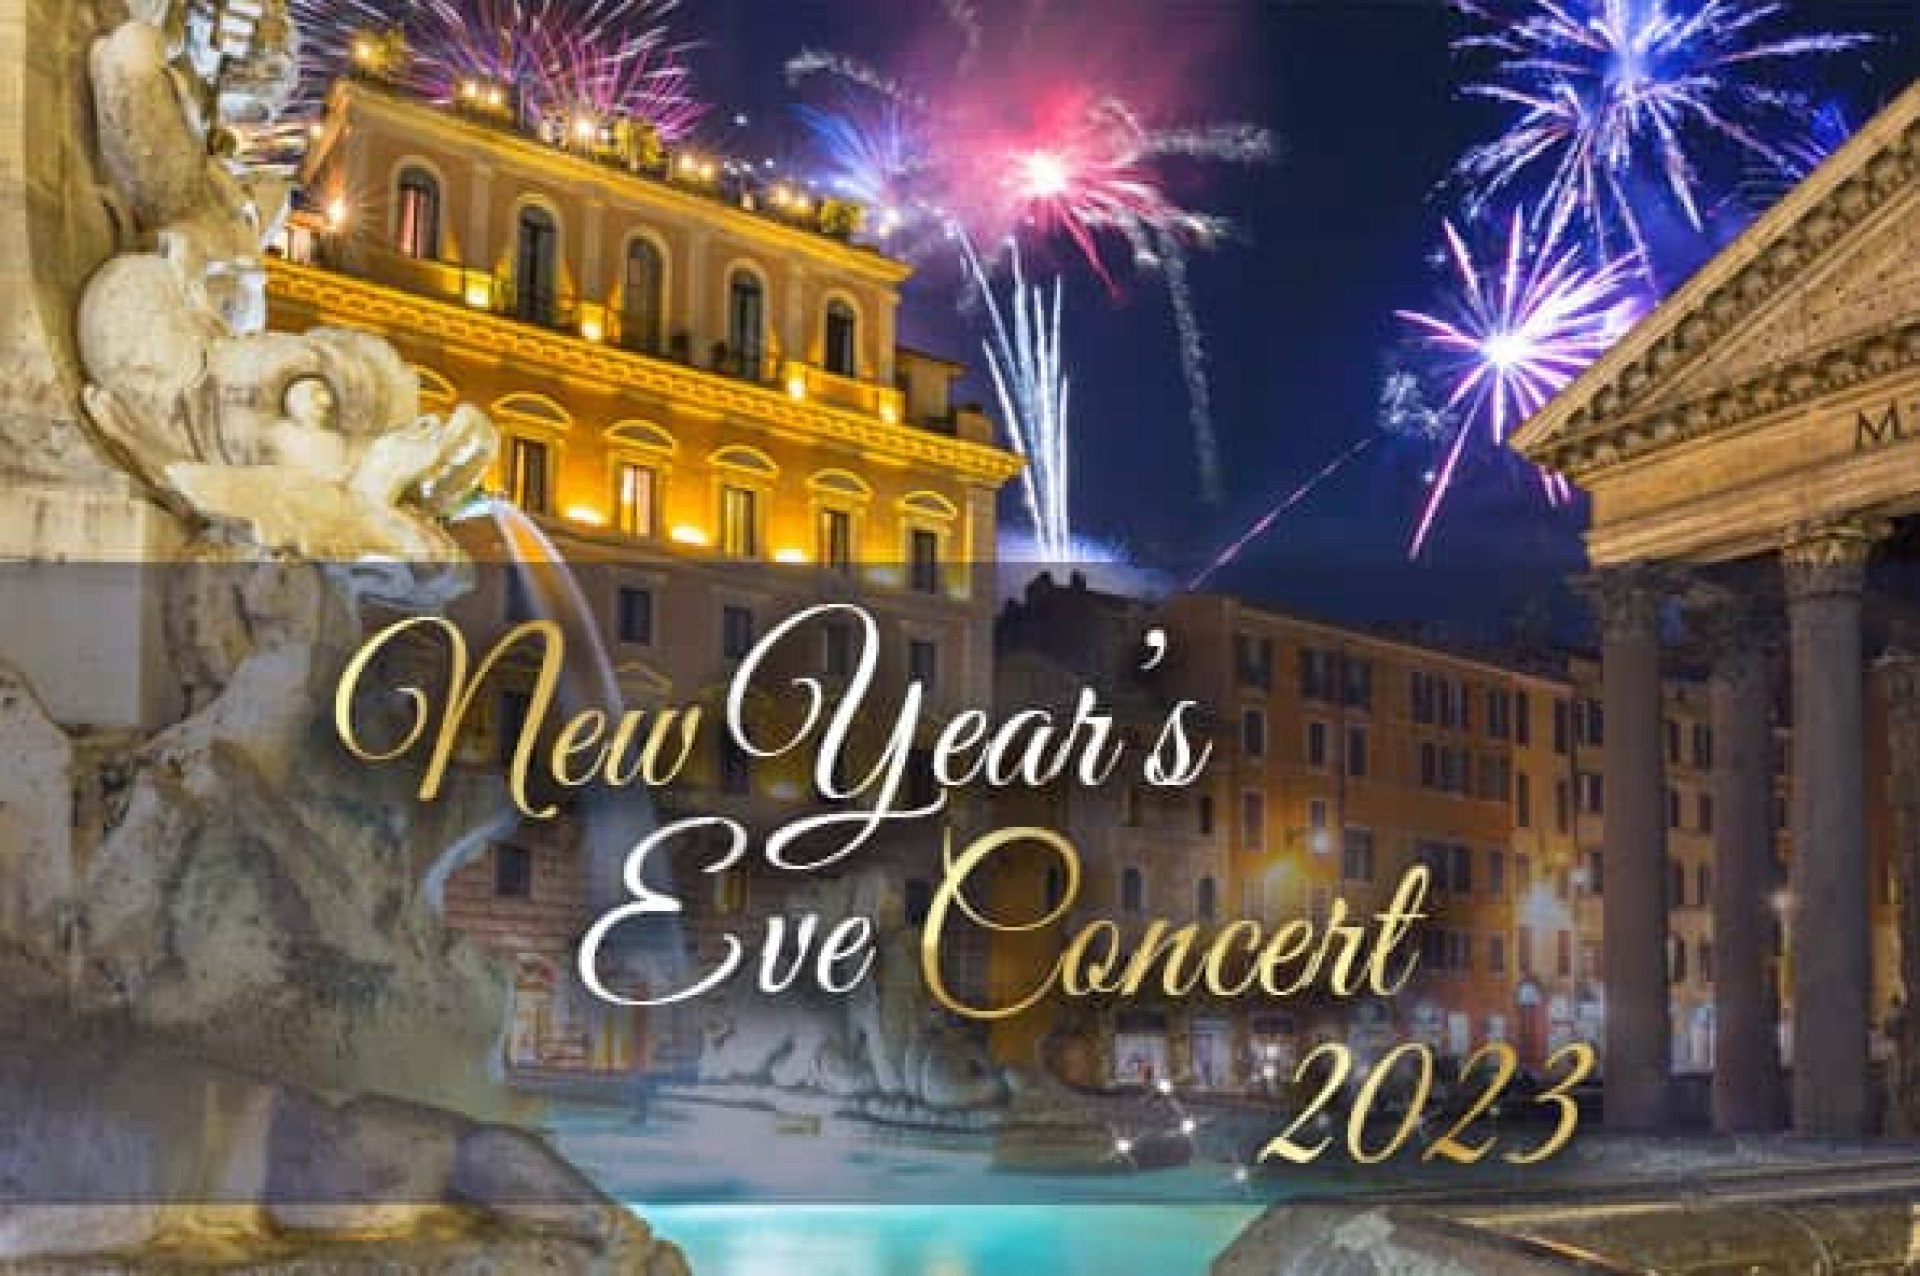 New Year´s Eve Concert